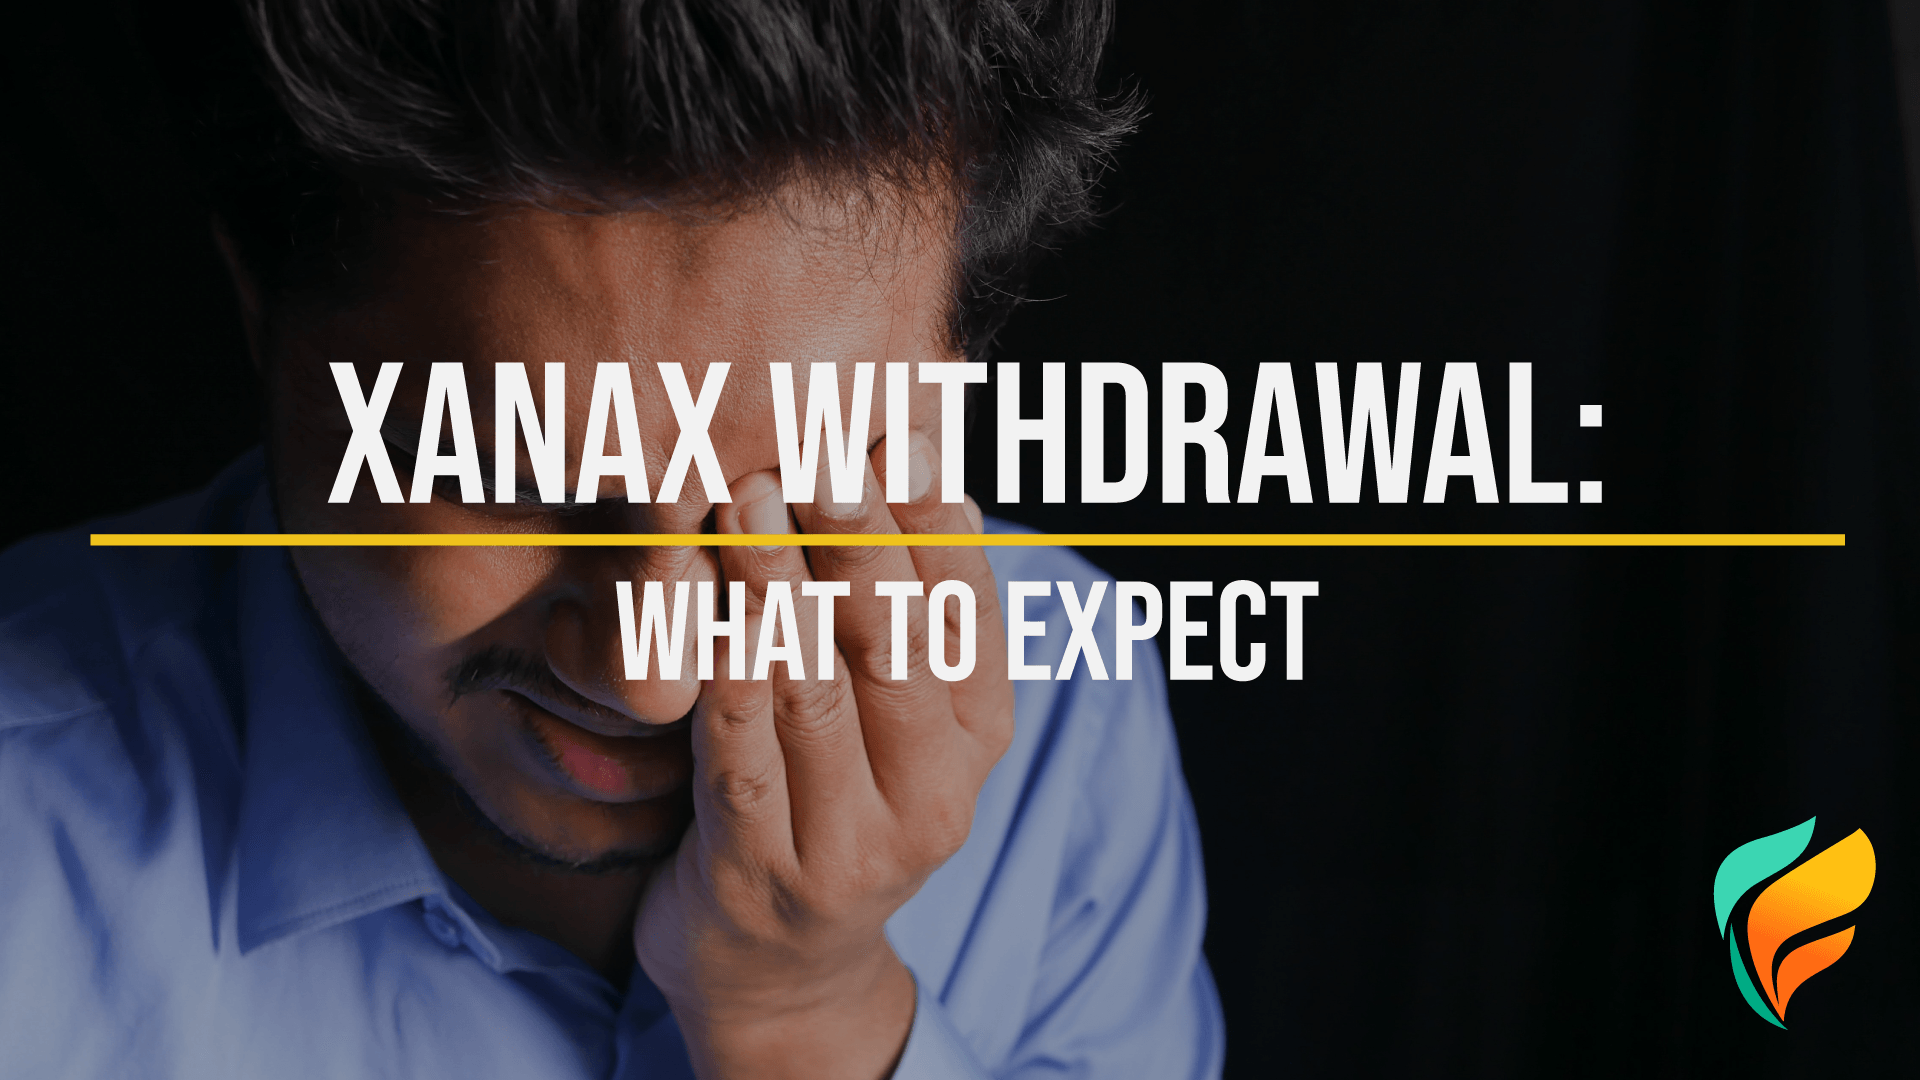 Xanax Withdrawal: The Facts